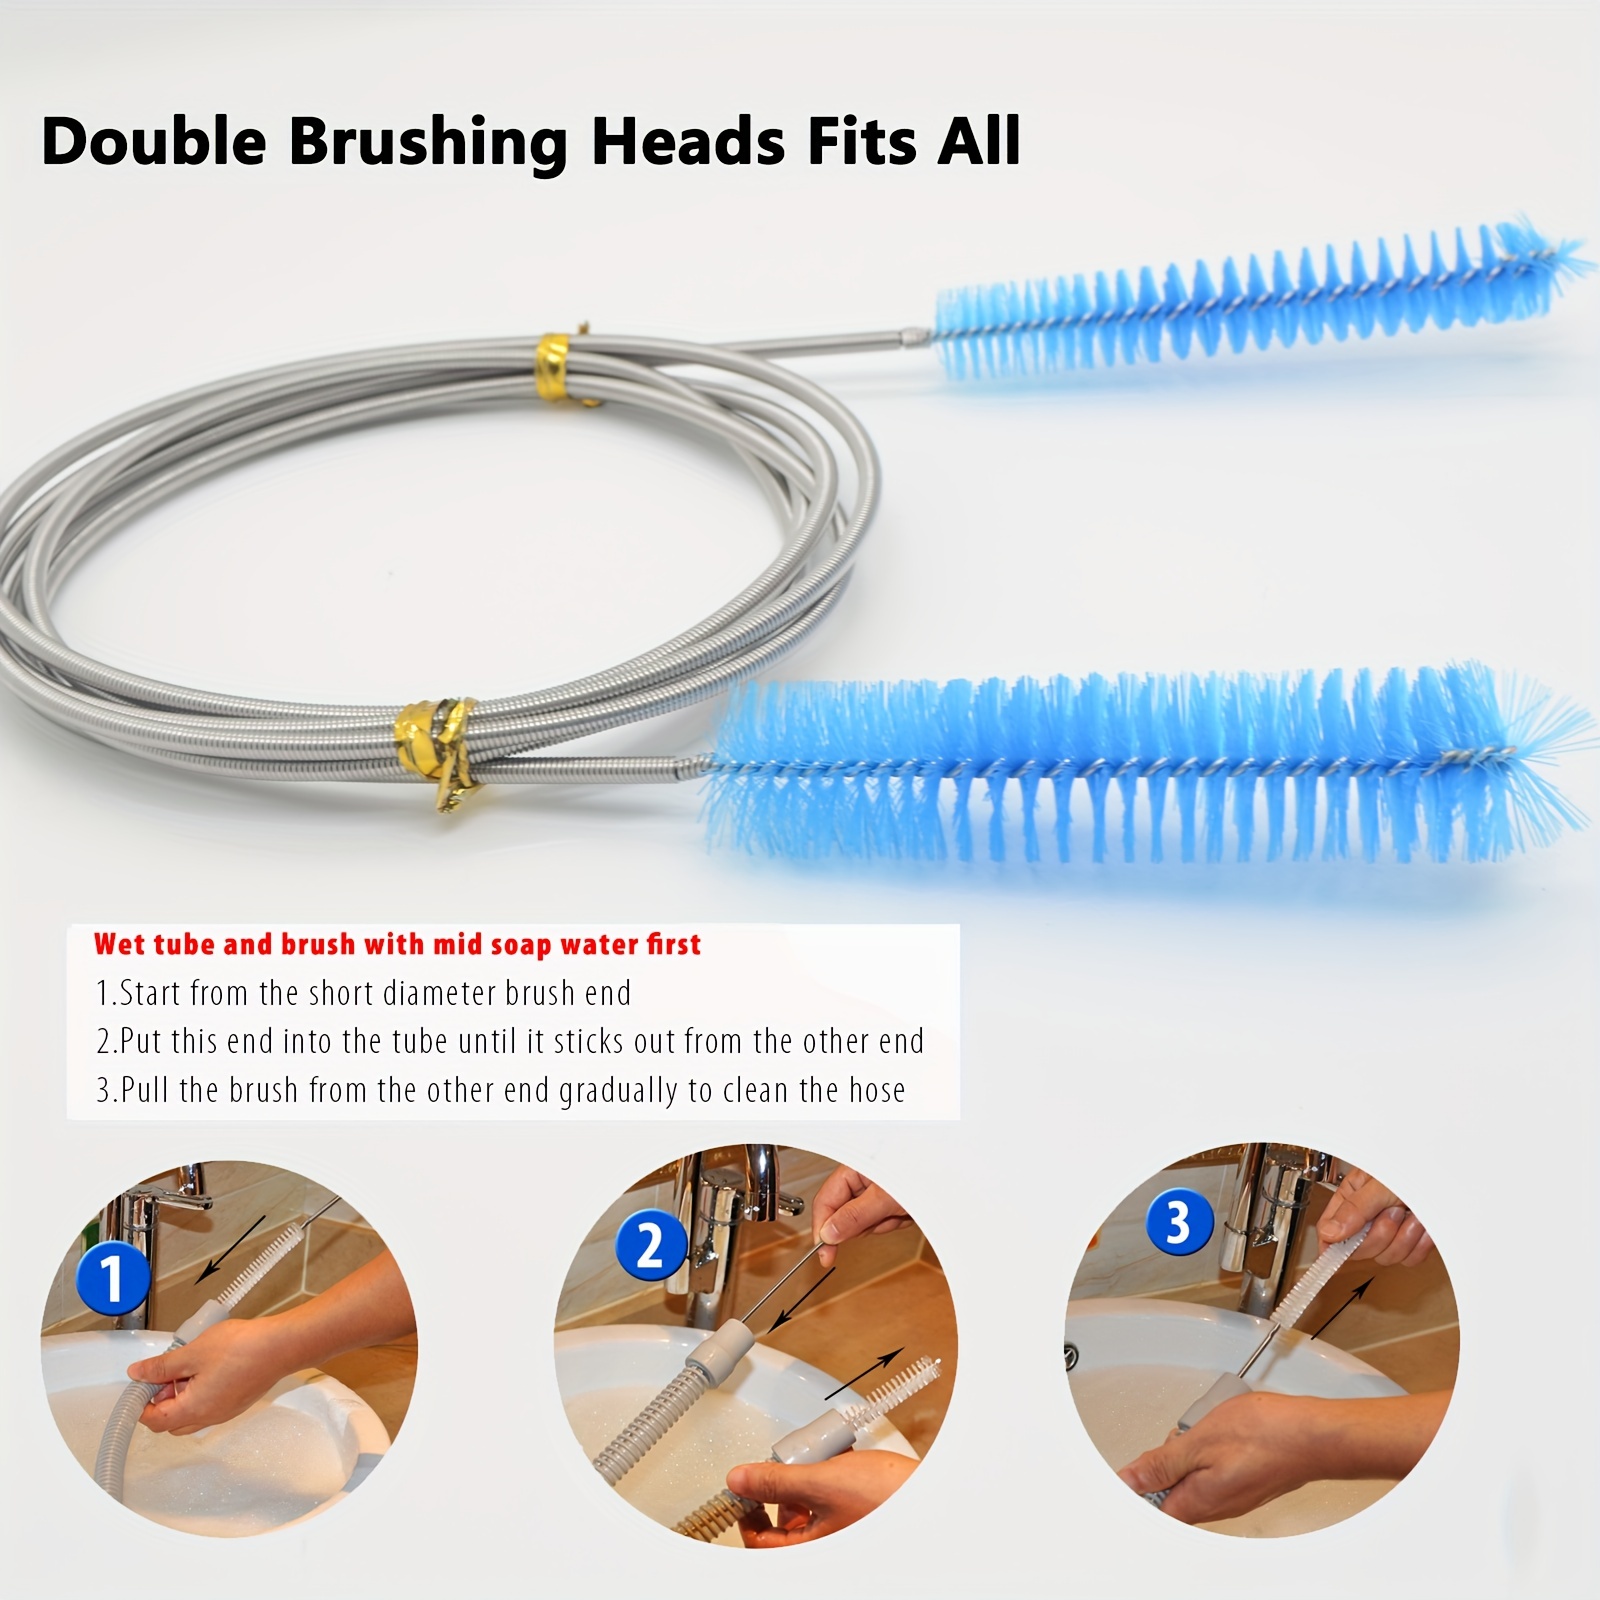 Cpap Tube Cleaning Brush With Double Size Bristle Brushes - Fits